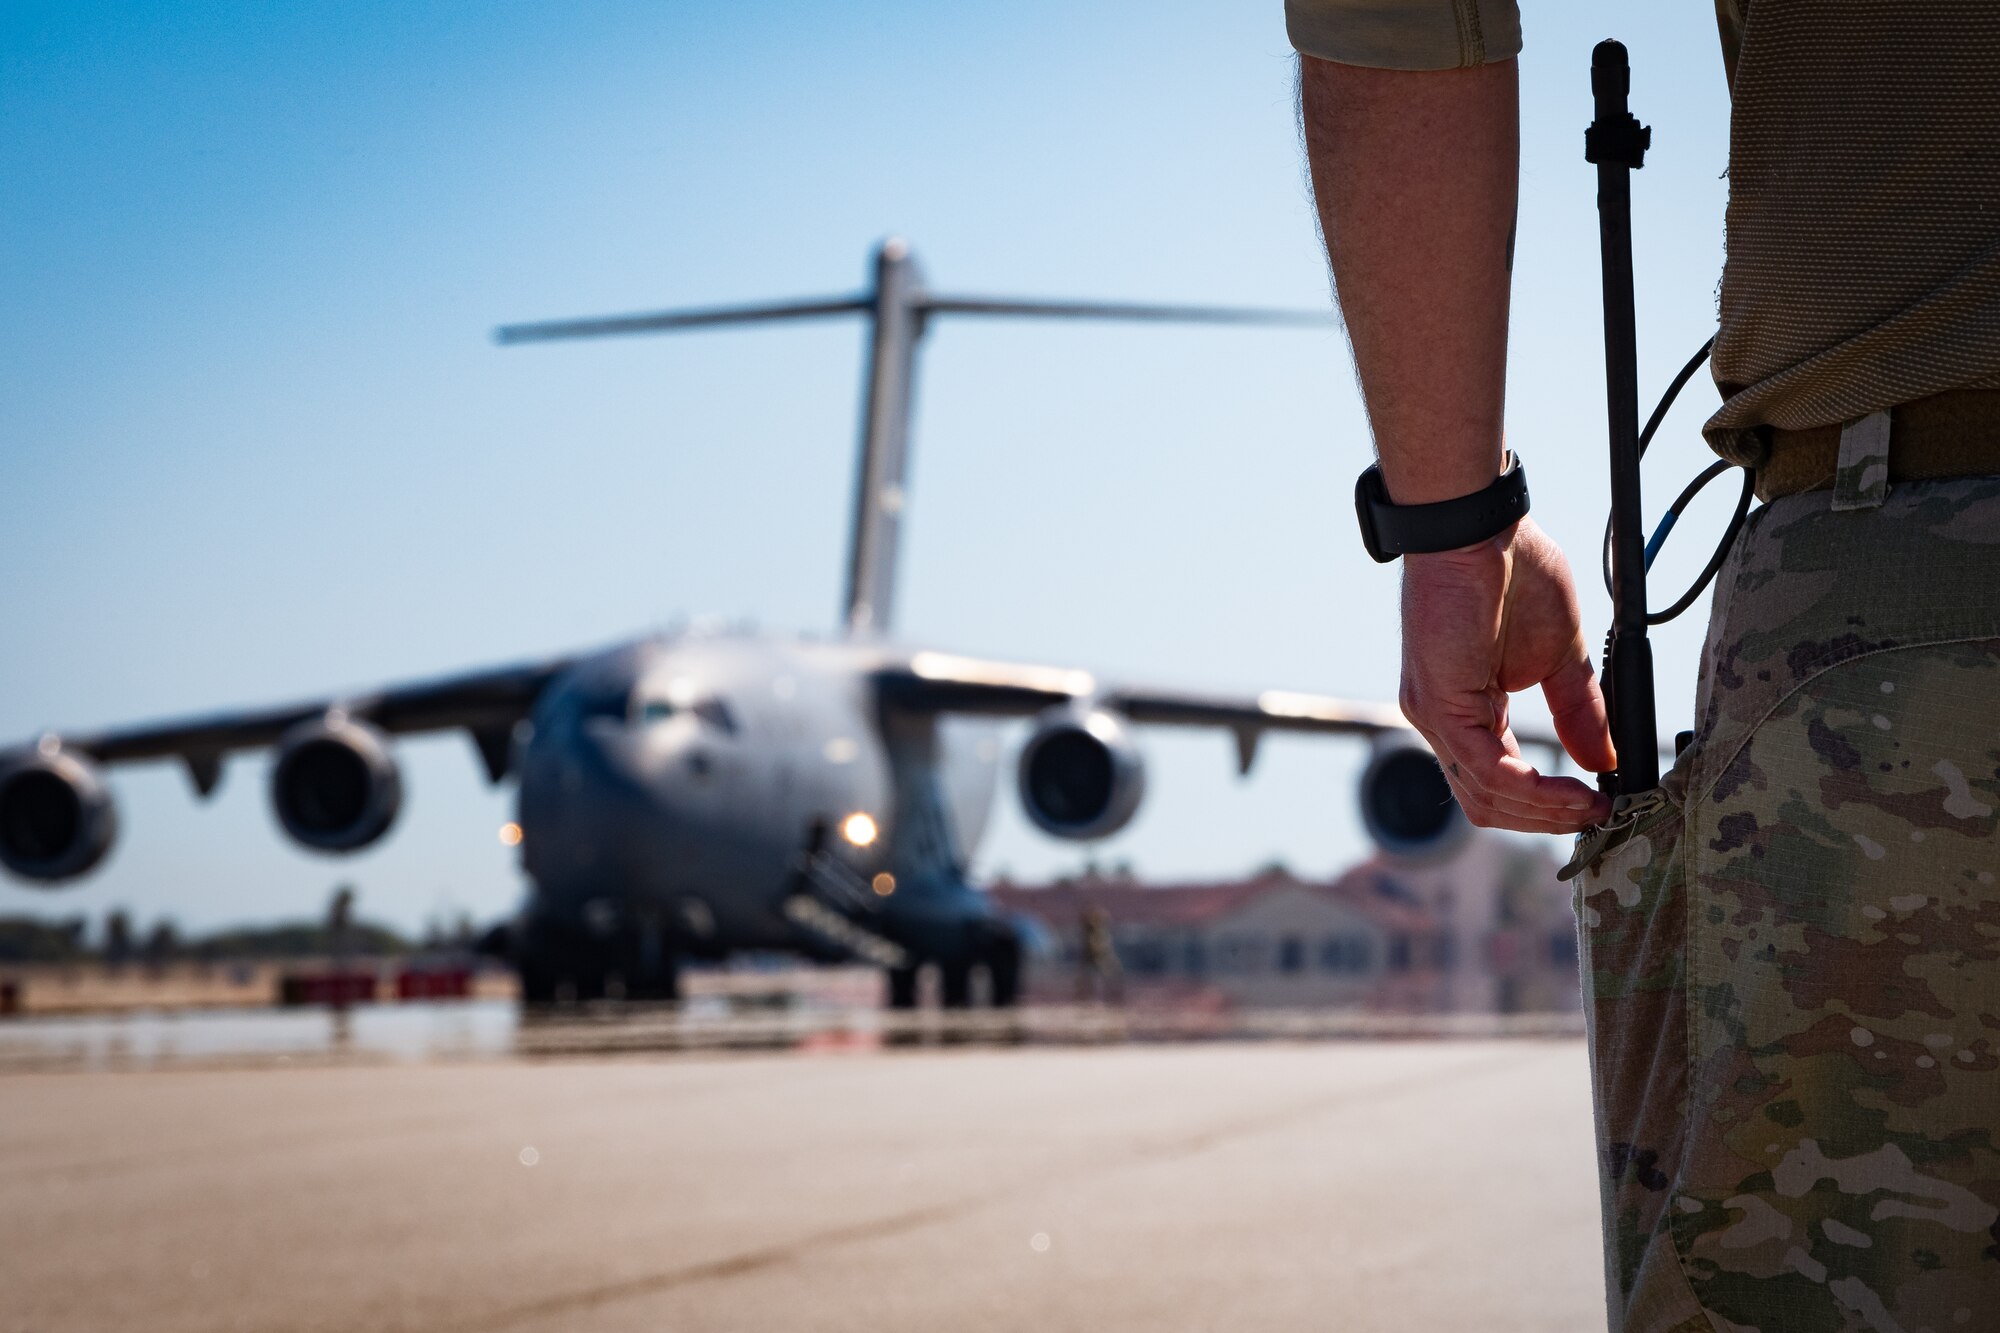 A photo of an Airman waiting for an Aircraft to taxi in